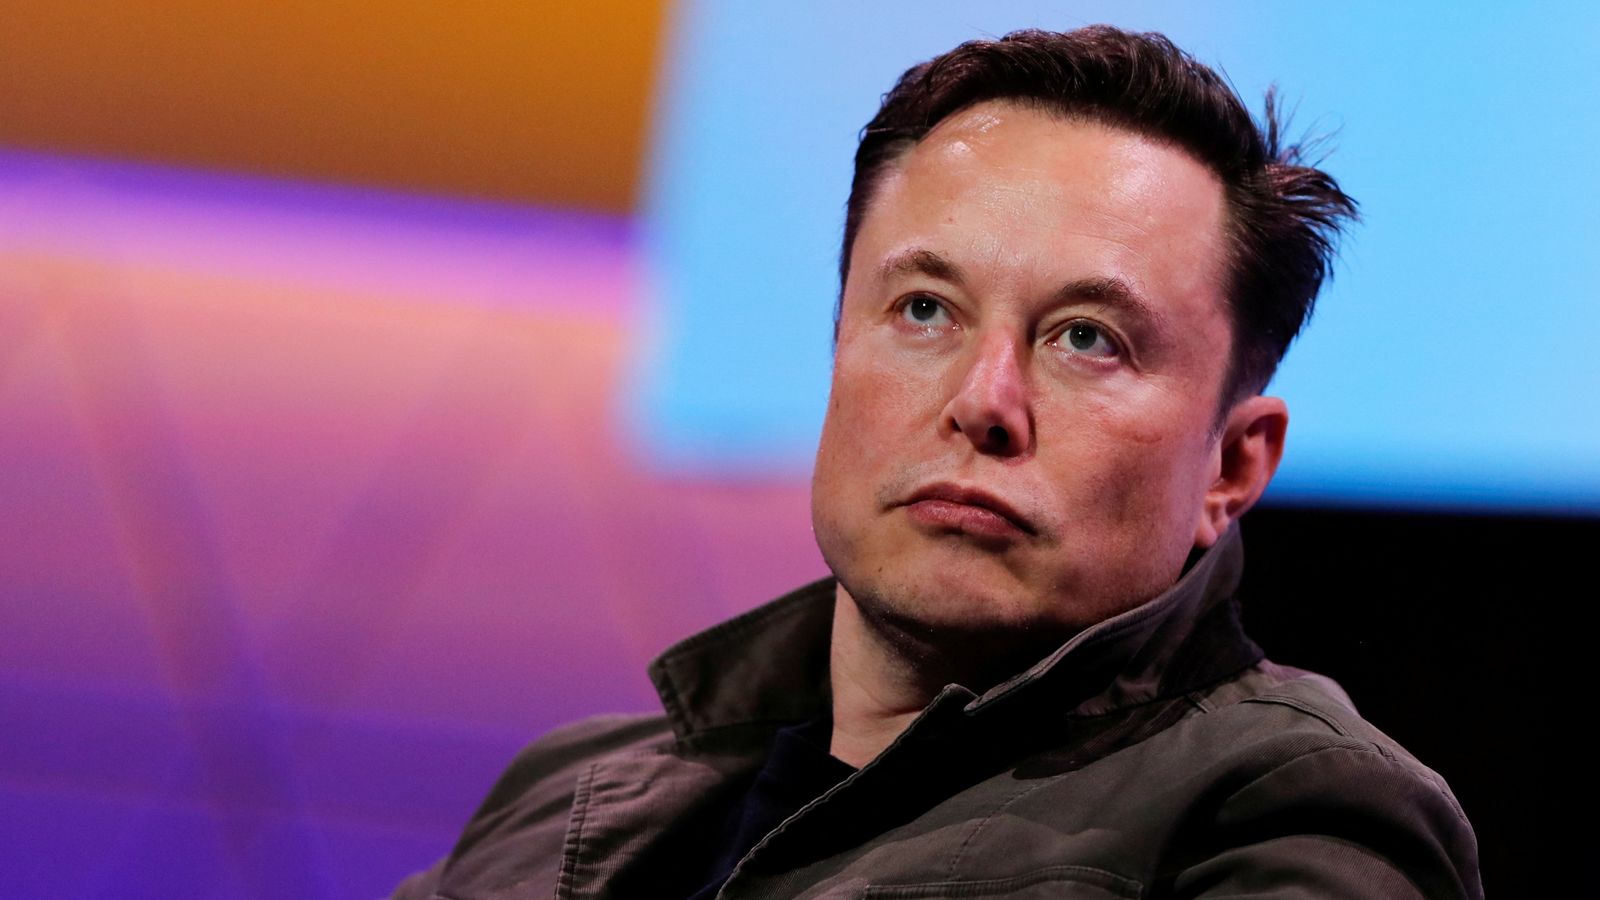 Teenager asks for $50k to delete Twitter account tracking Elon Musk’s private jet